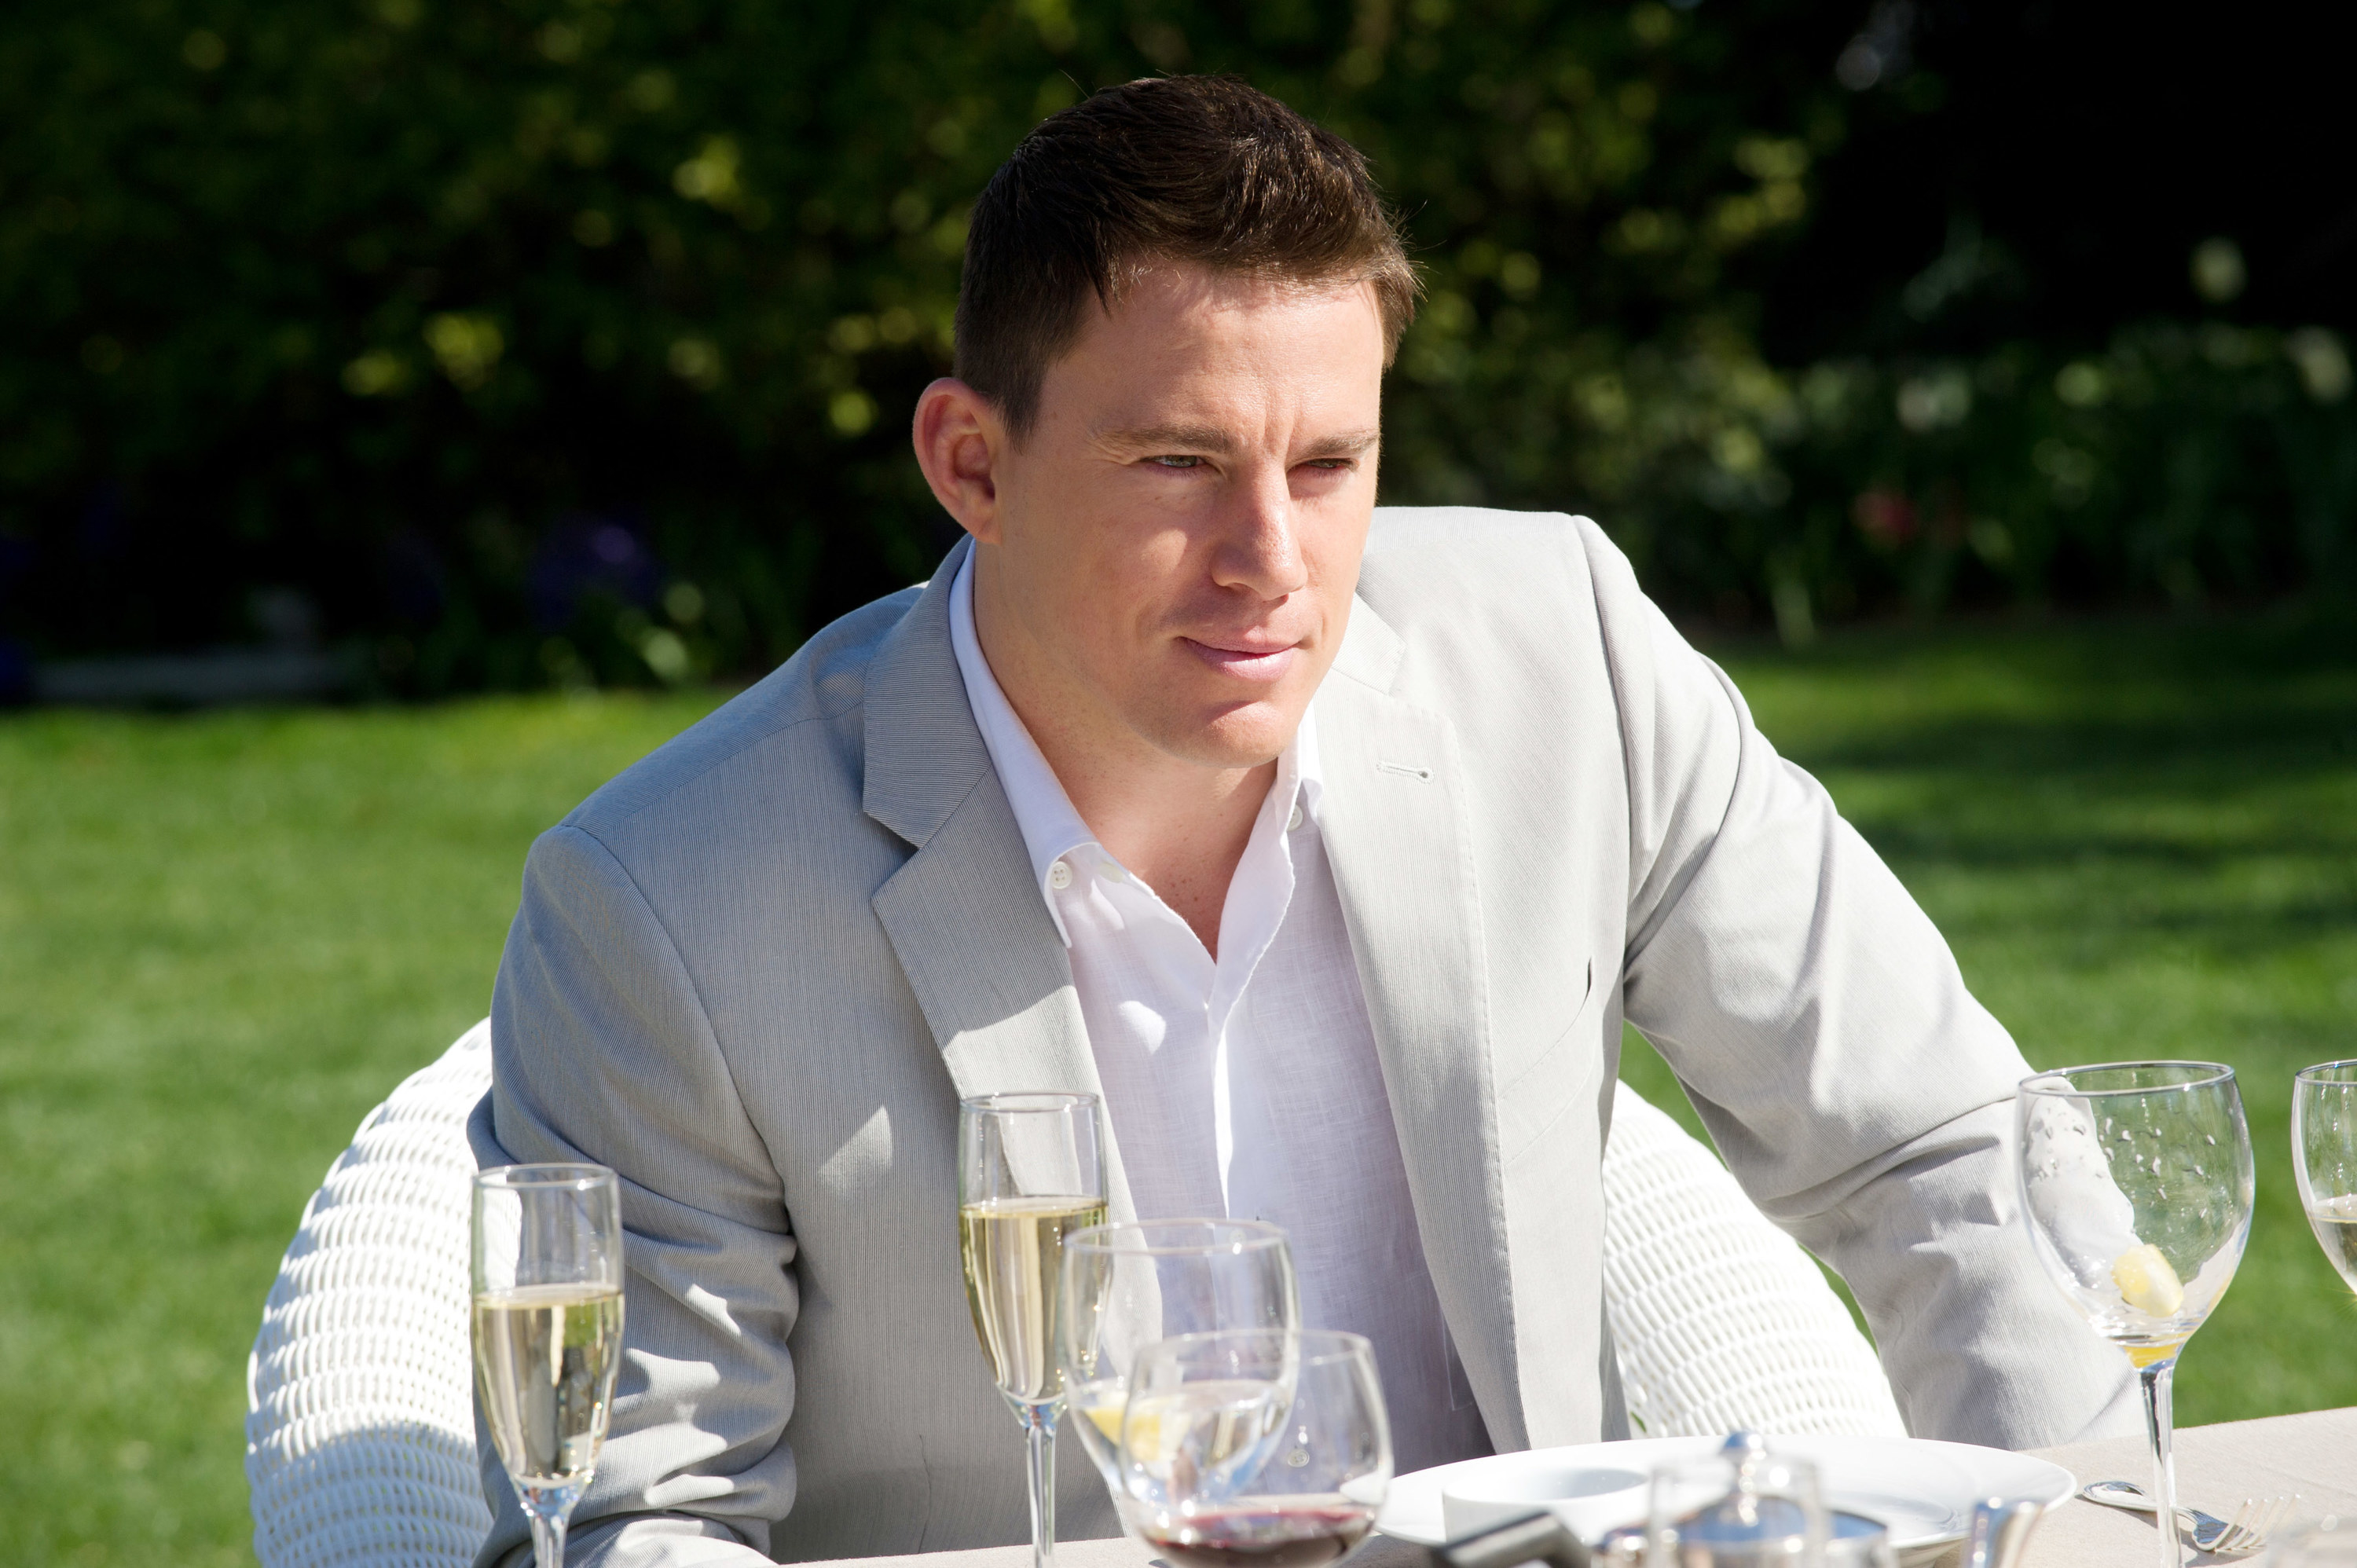 Tatum in a sports coat sitting outside at a table with champagne